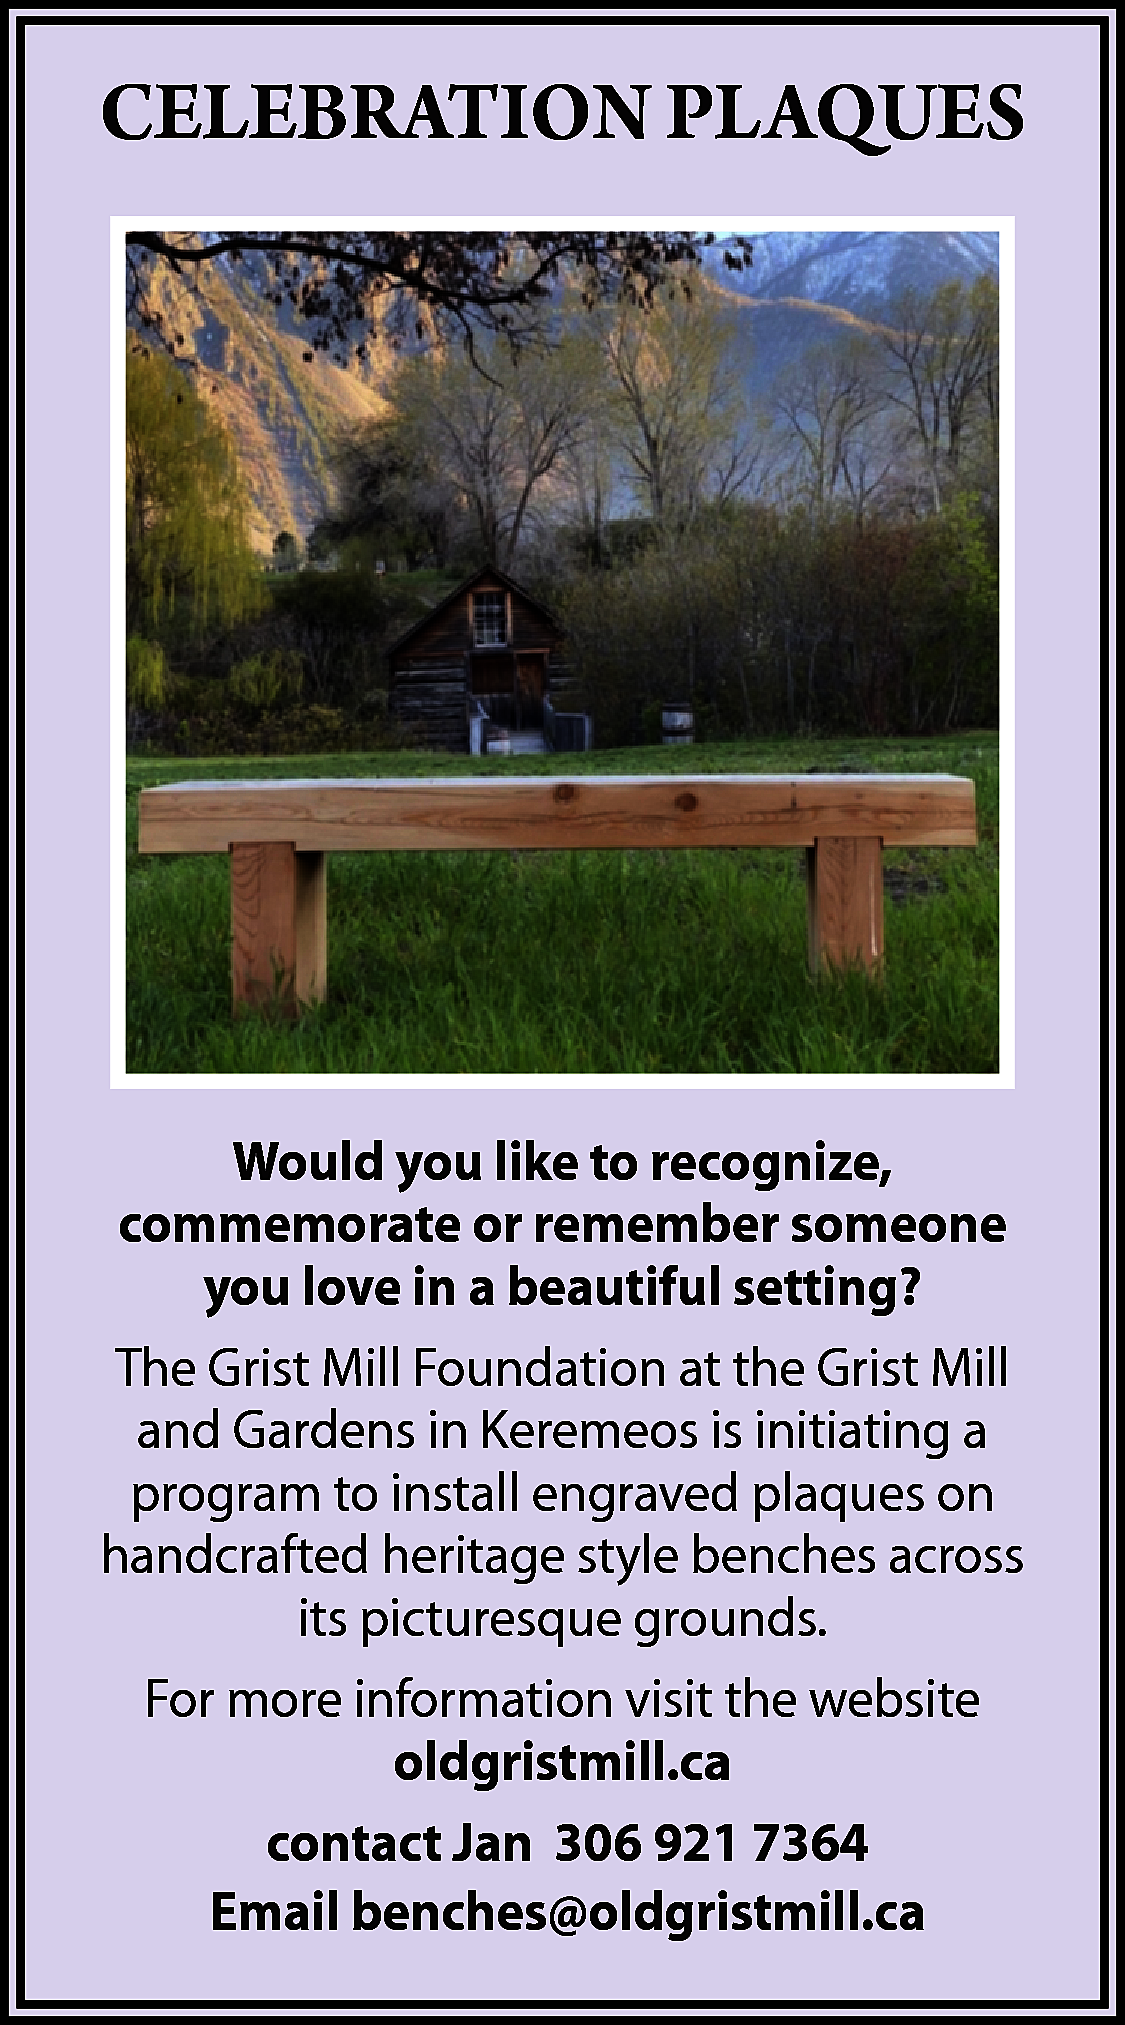 CELEBRATION PLAQUES <br> <br>Would you  CELEBRATION PLAQUES    Would you like to recognize,  commemorate or remember someone  you love in a beautiful setting?  The Grist Mill Foundation at the Grist Mill  and Gardens in Keremeos is initiating a  program to install engraved plaques on  handcrafted heritage style benches across  its picturesque grounds.  For more information visit the website  oldgristmill.ca  contact Jan 306 921 7364  Email benches@oldgristmill.ca    